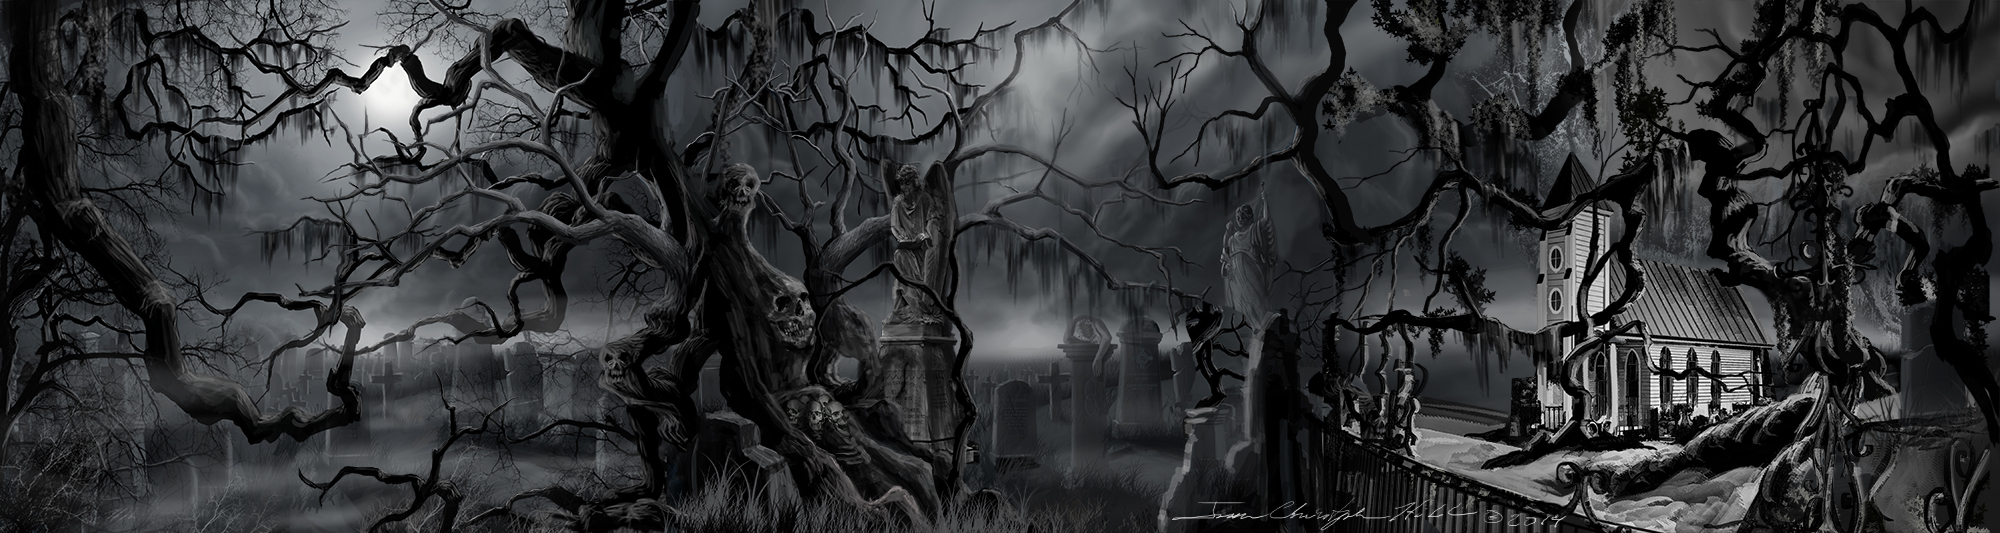 Darkness Sets In to the Graveyard - Long Panorama